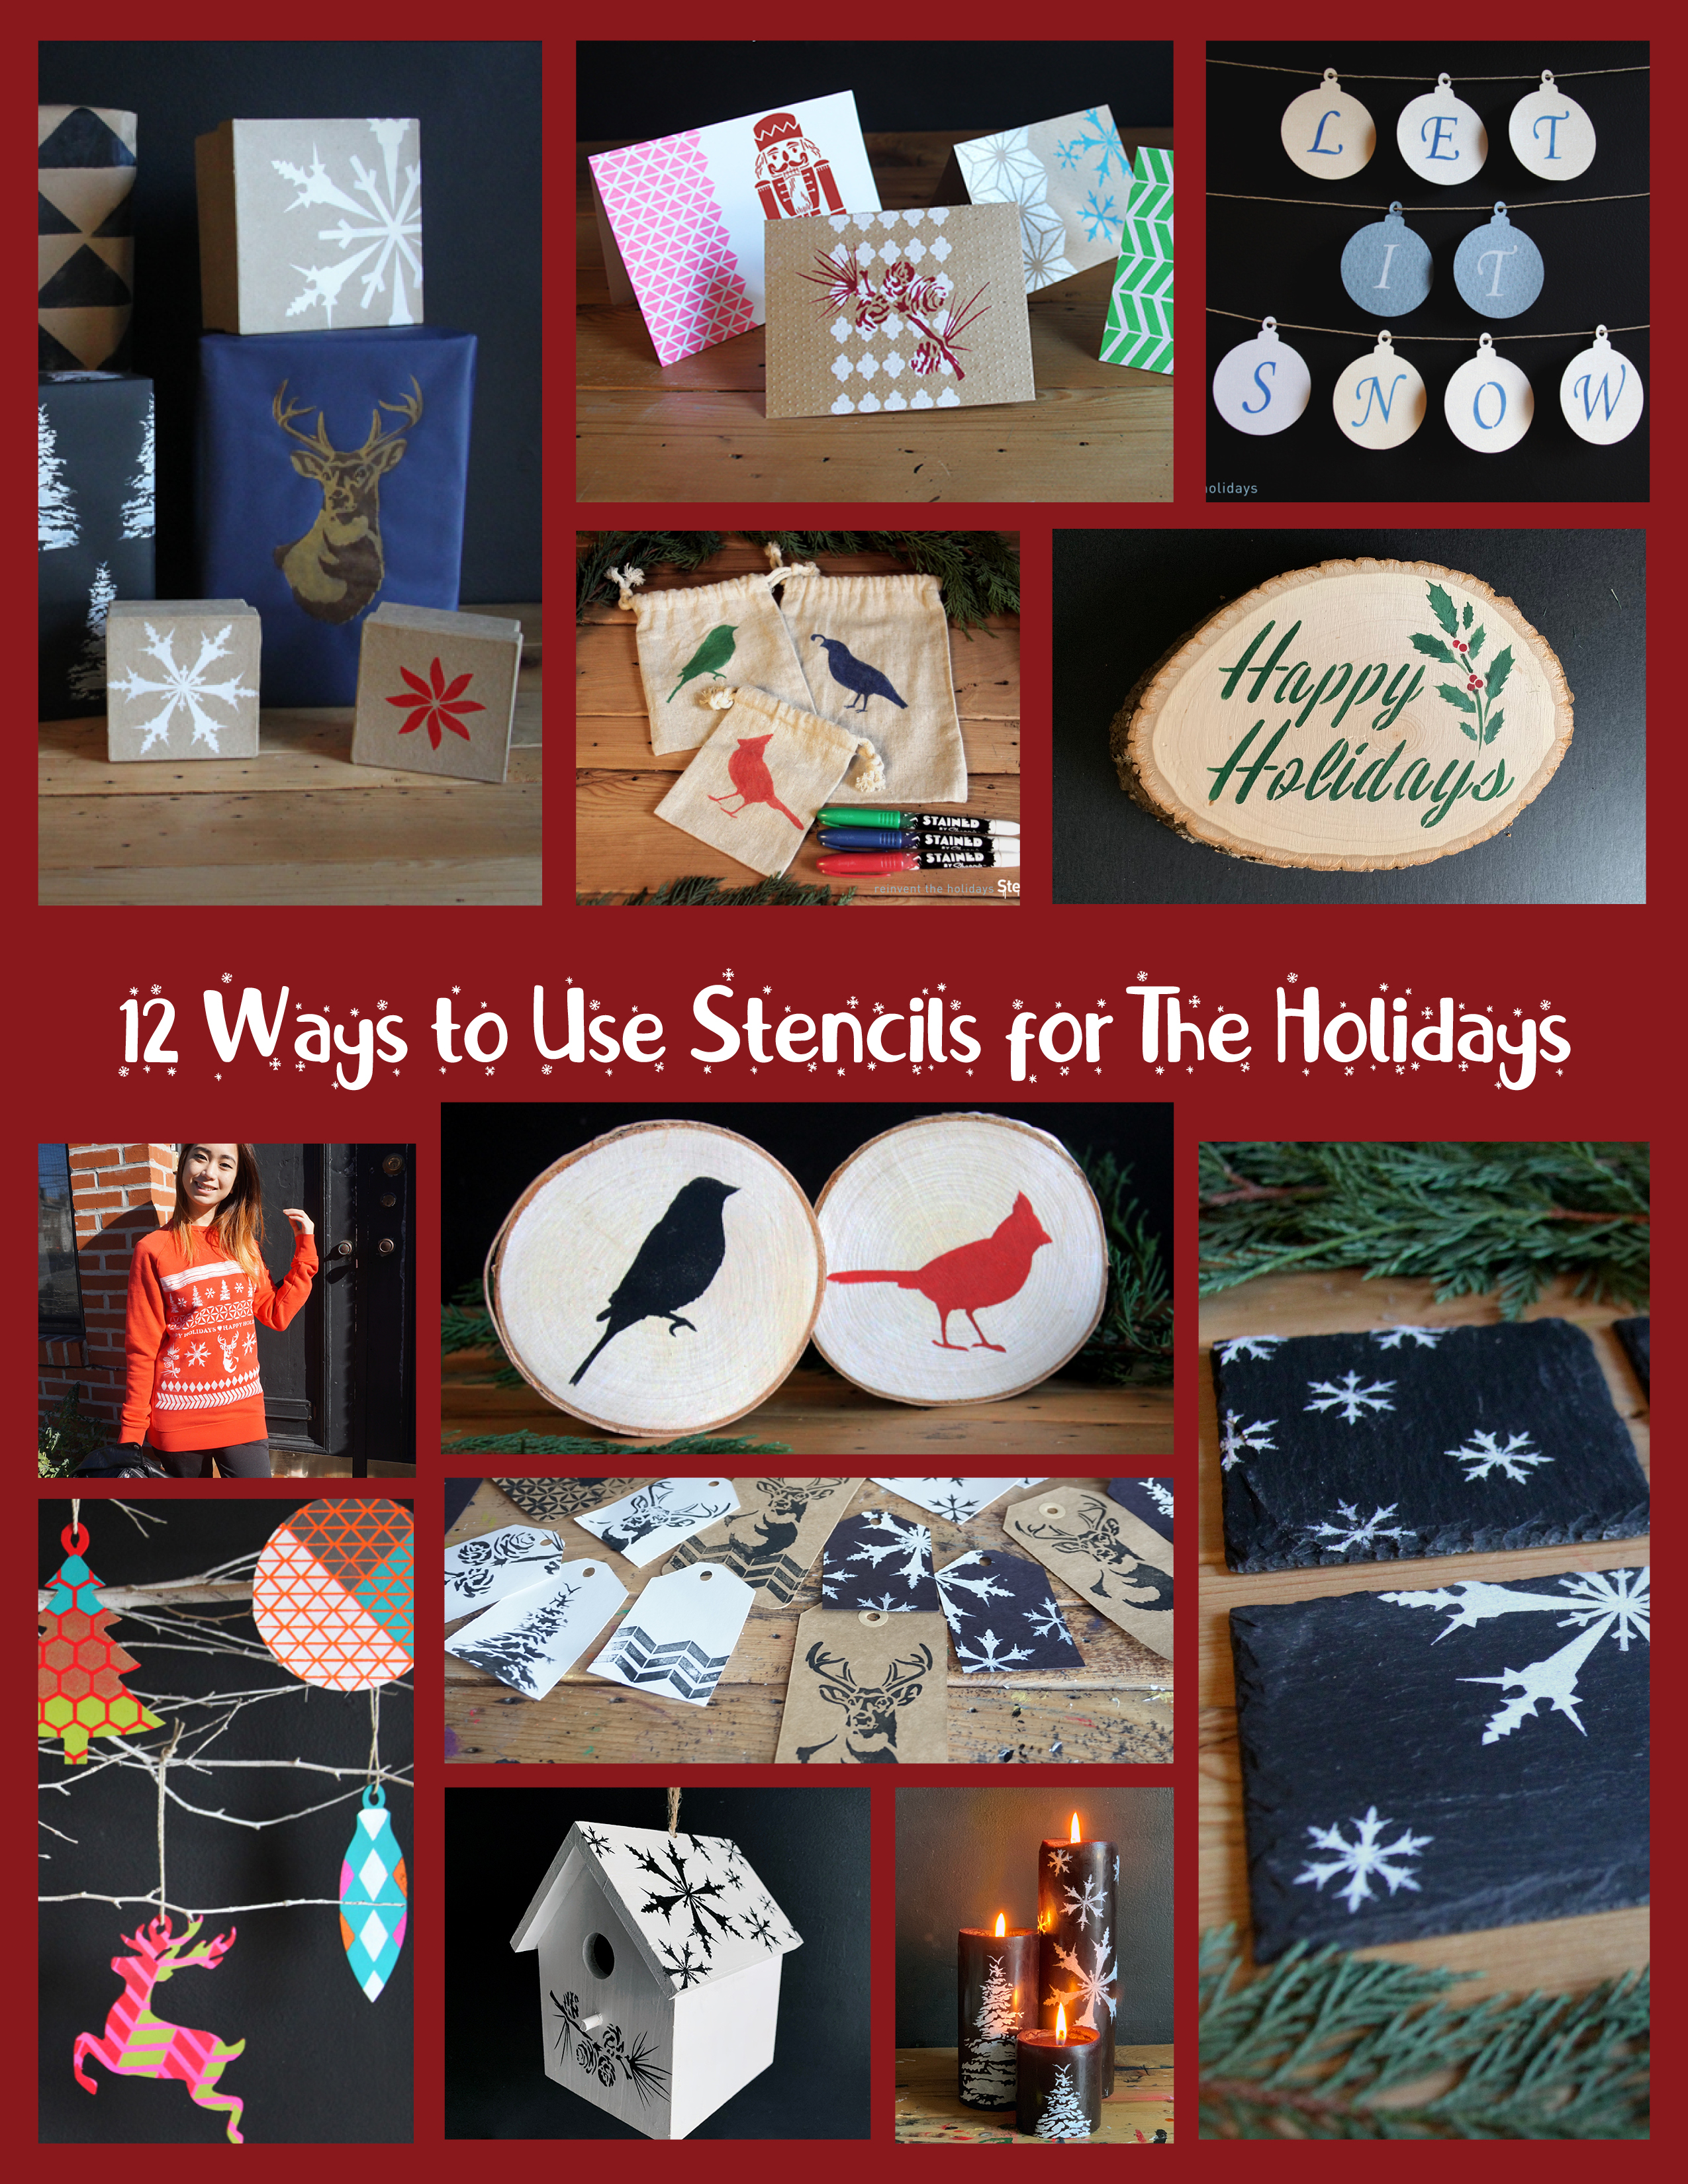 12 Ways to Use Stencils For the Holidays Collage